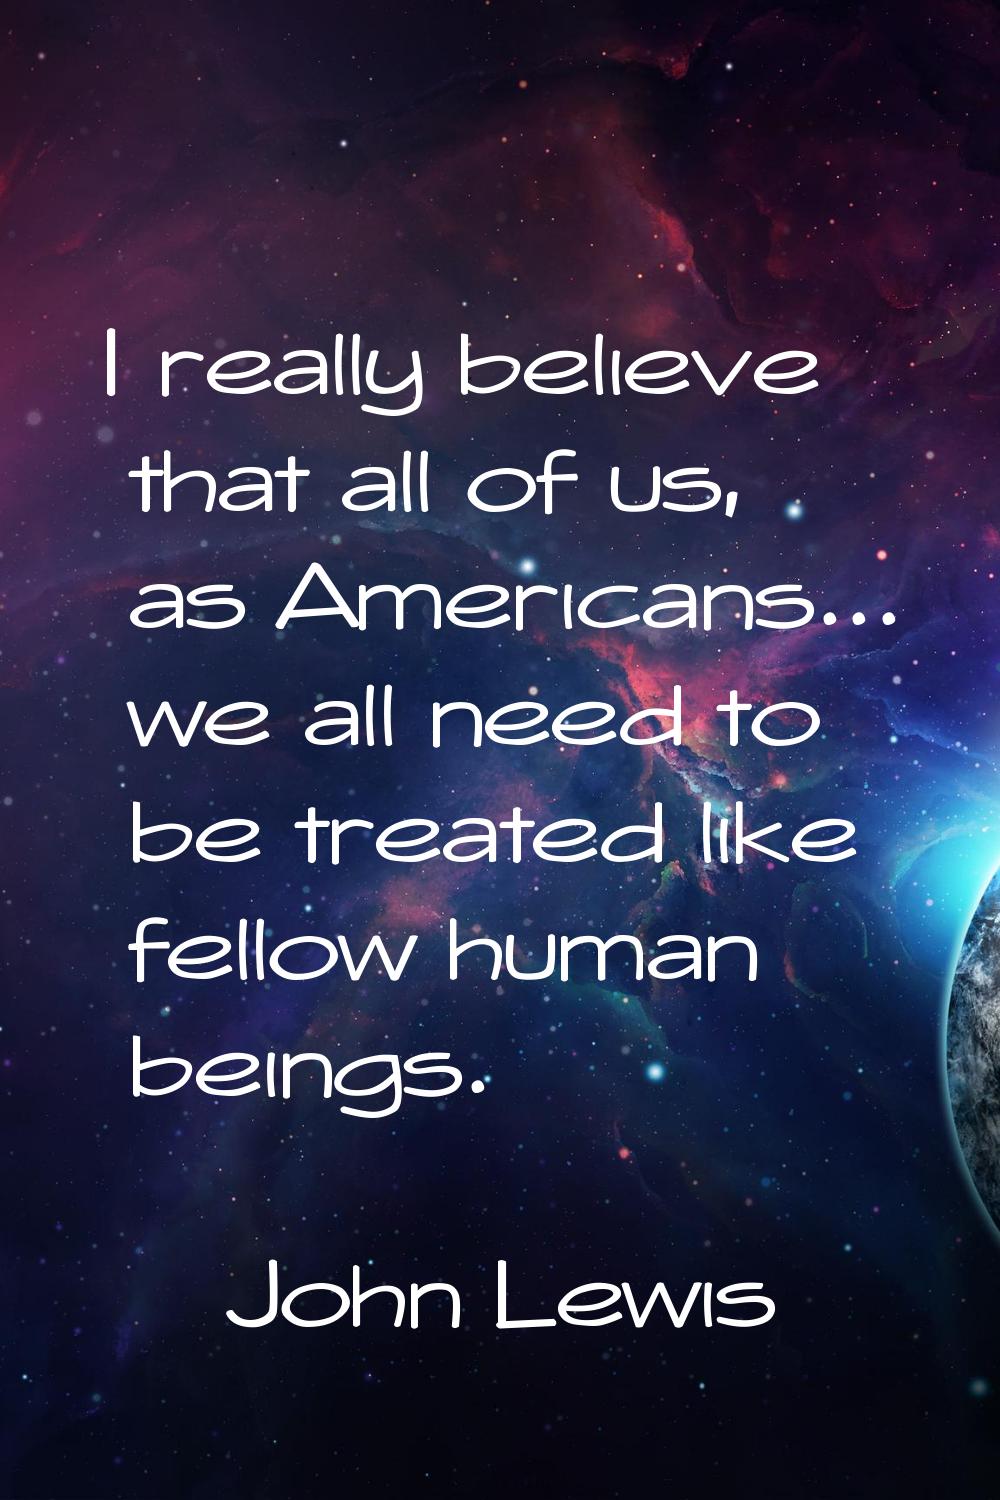 I really believe that all of us, as Americans... we all need to be treated like fellow human beings